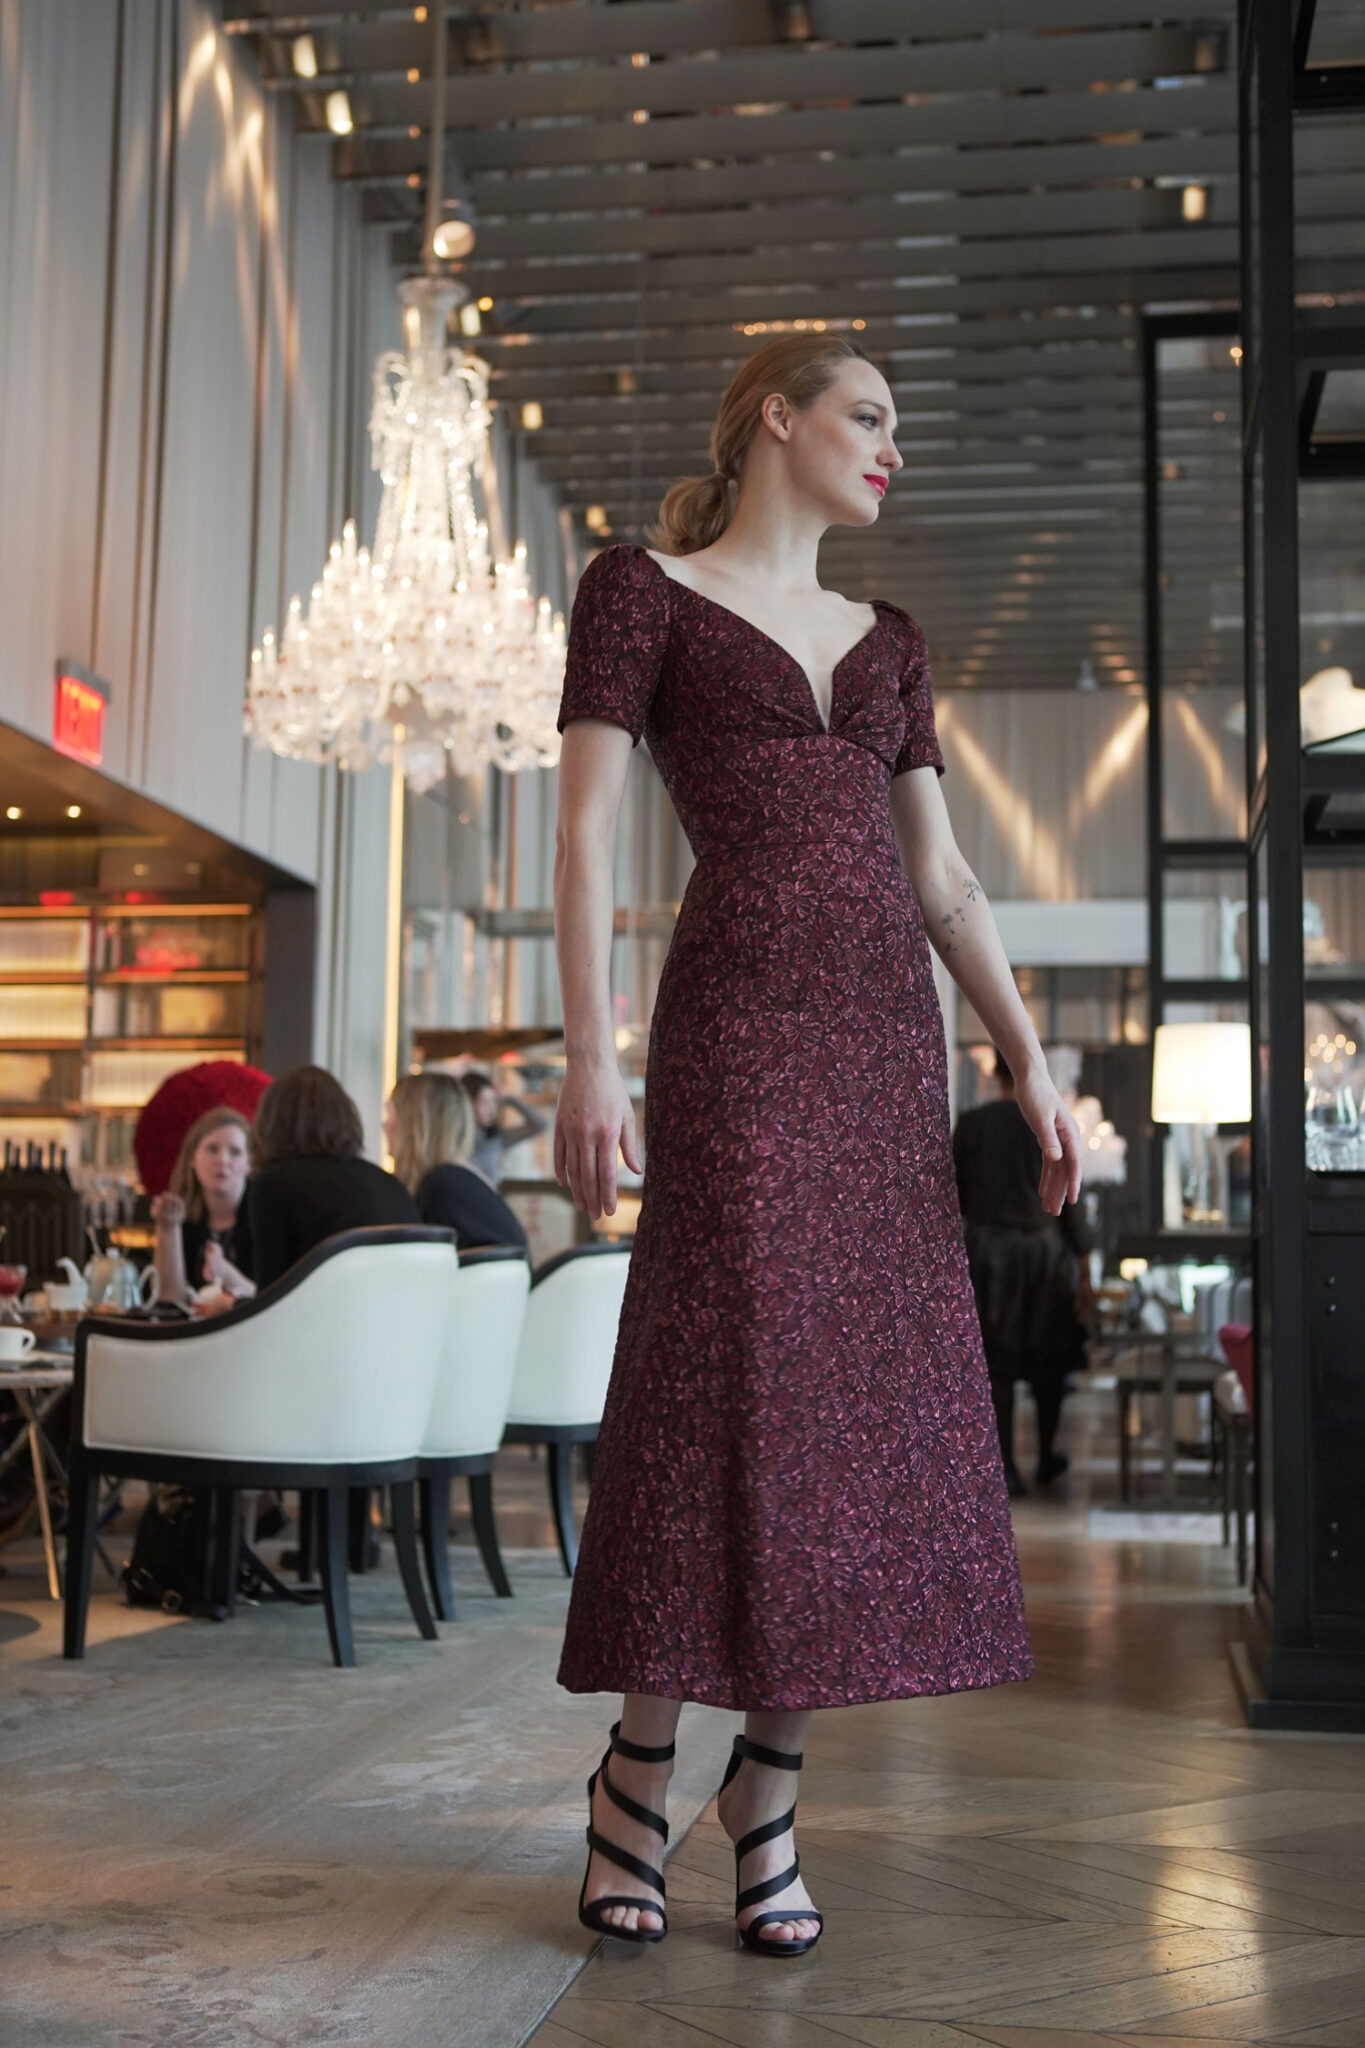 Fairytale Look 3 - Elegant dress with purple texture for casual occasions - Verdin New York